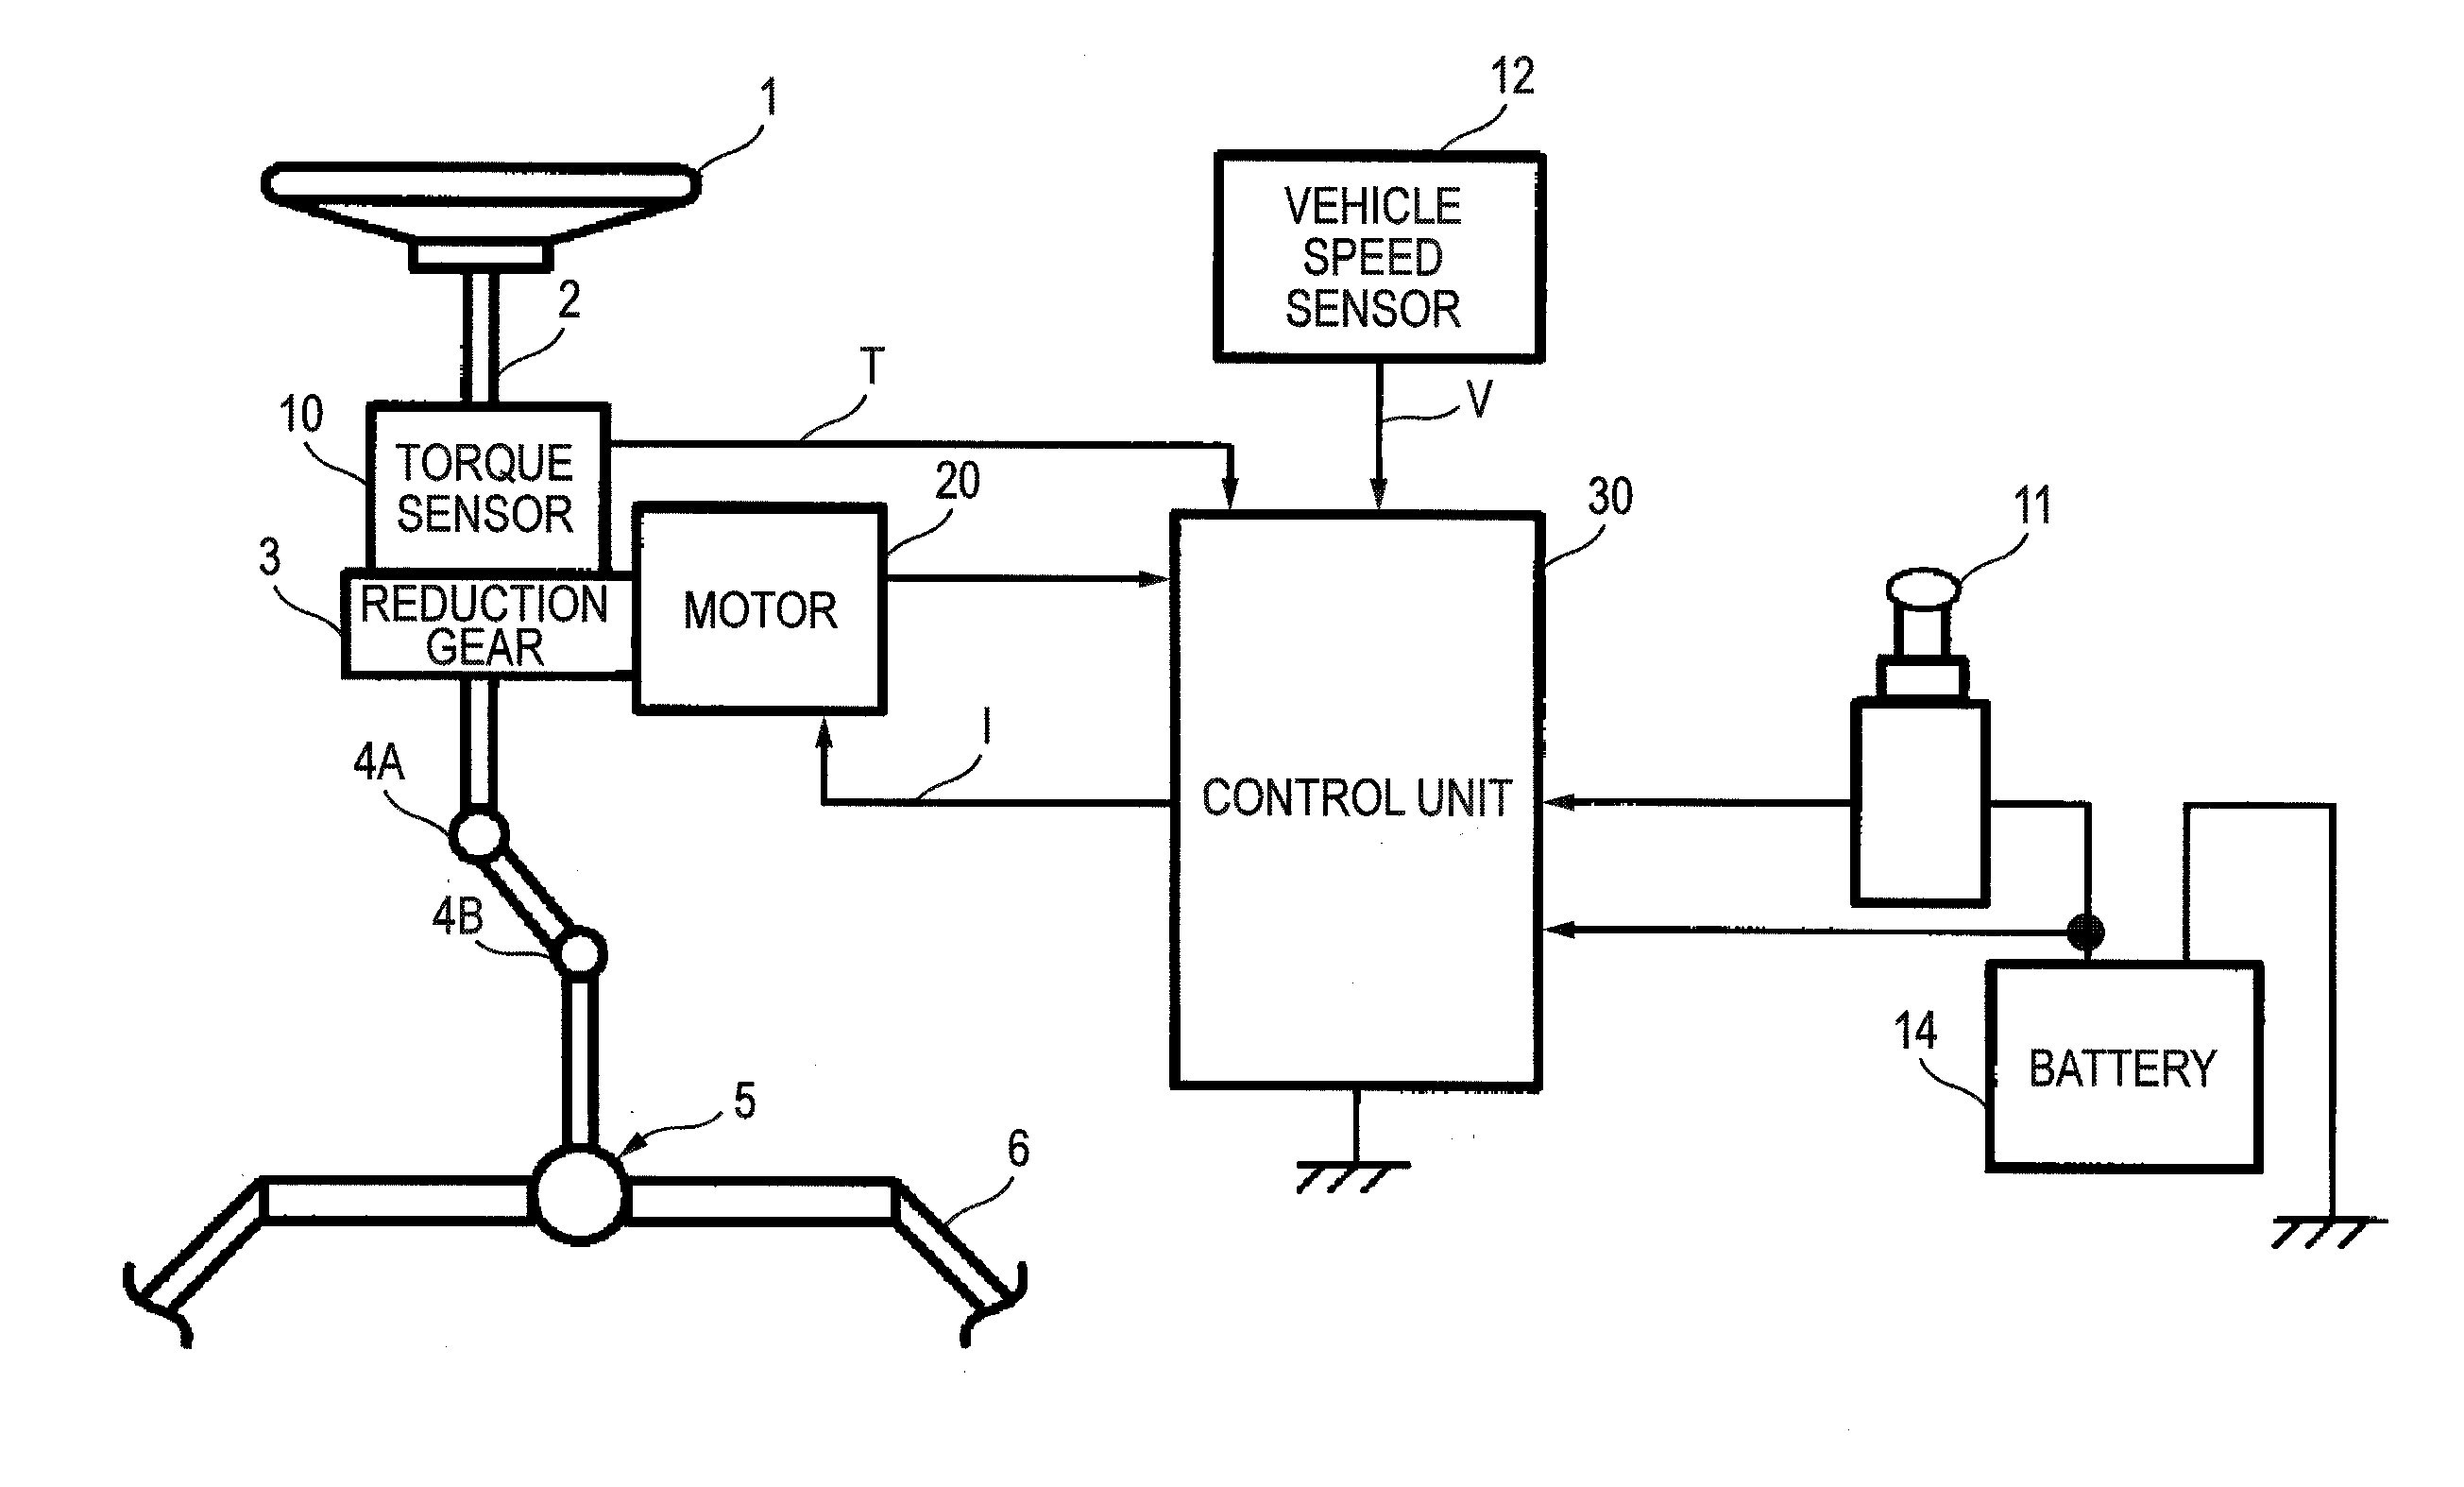 Control system for electronic power steering